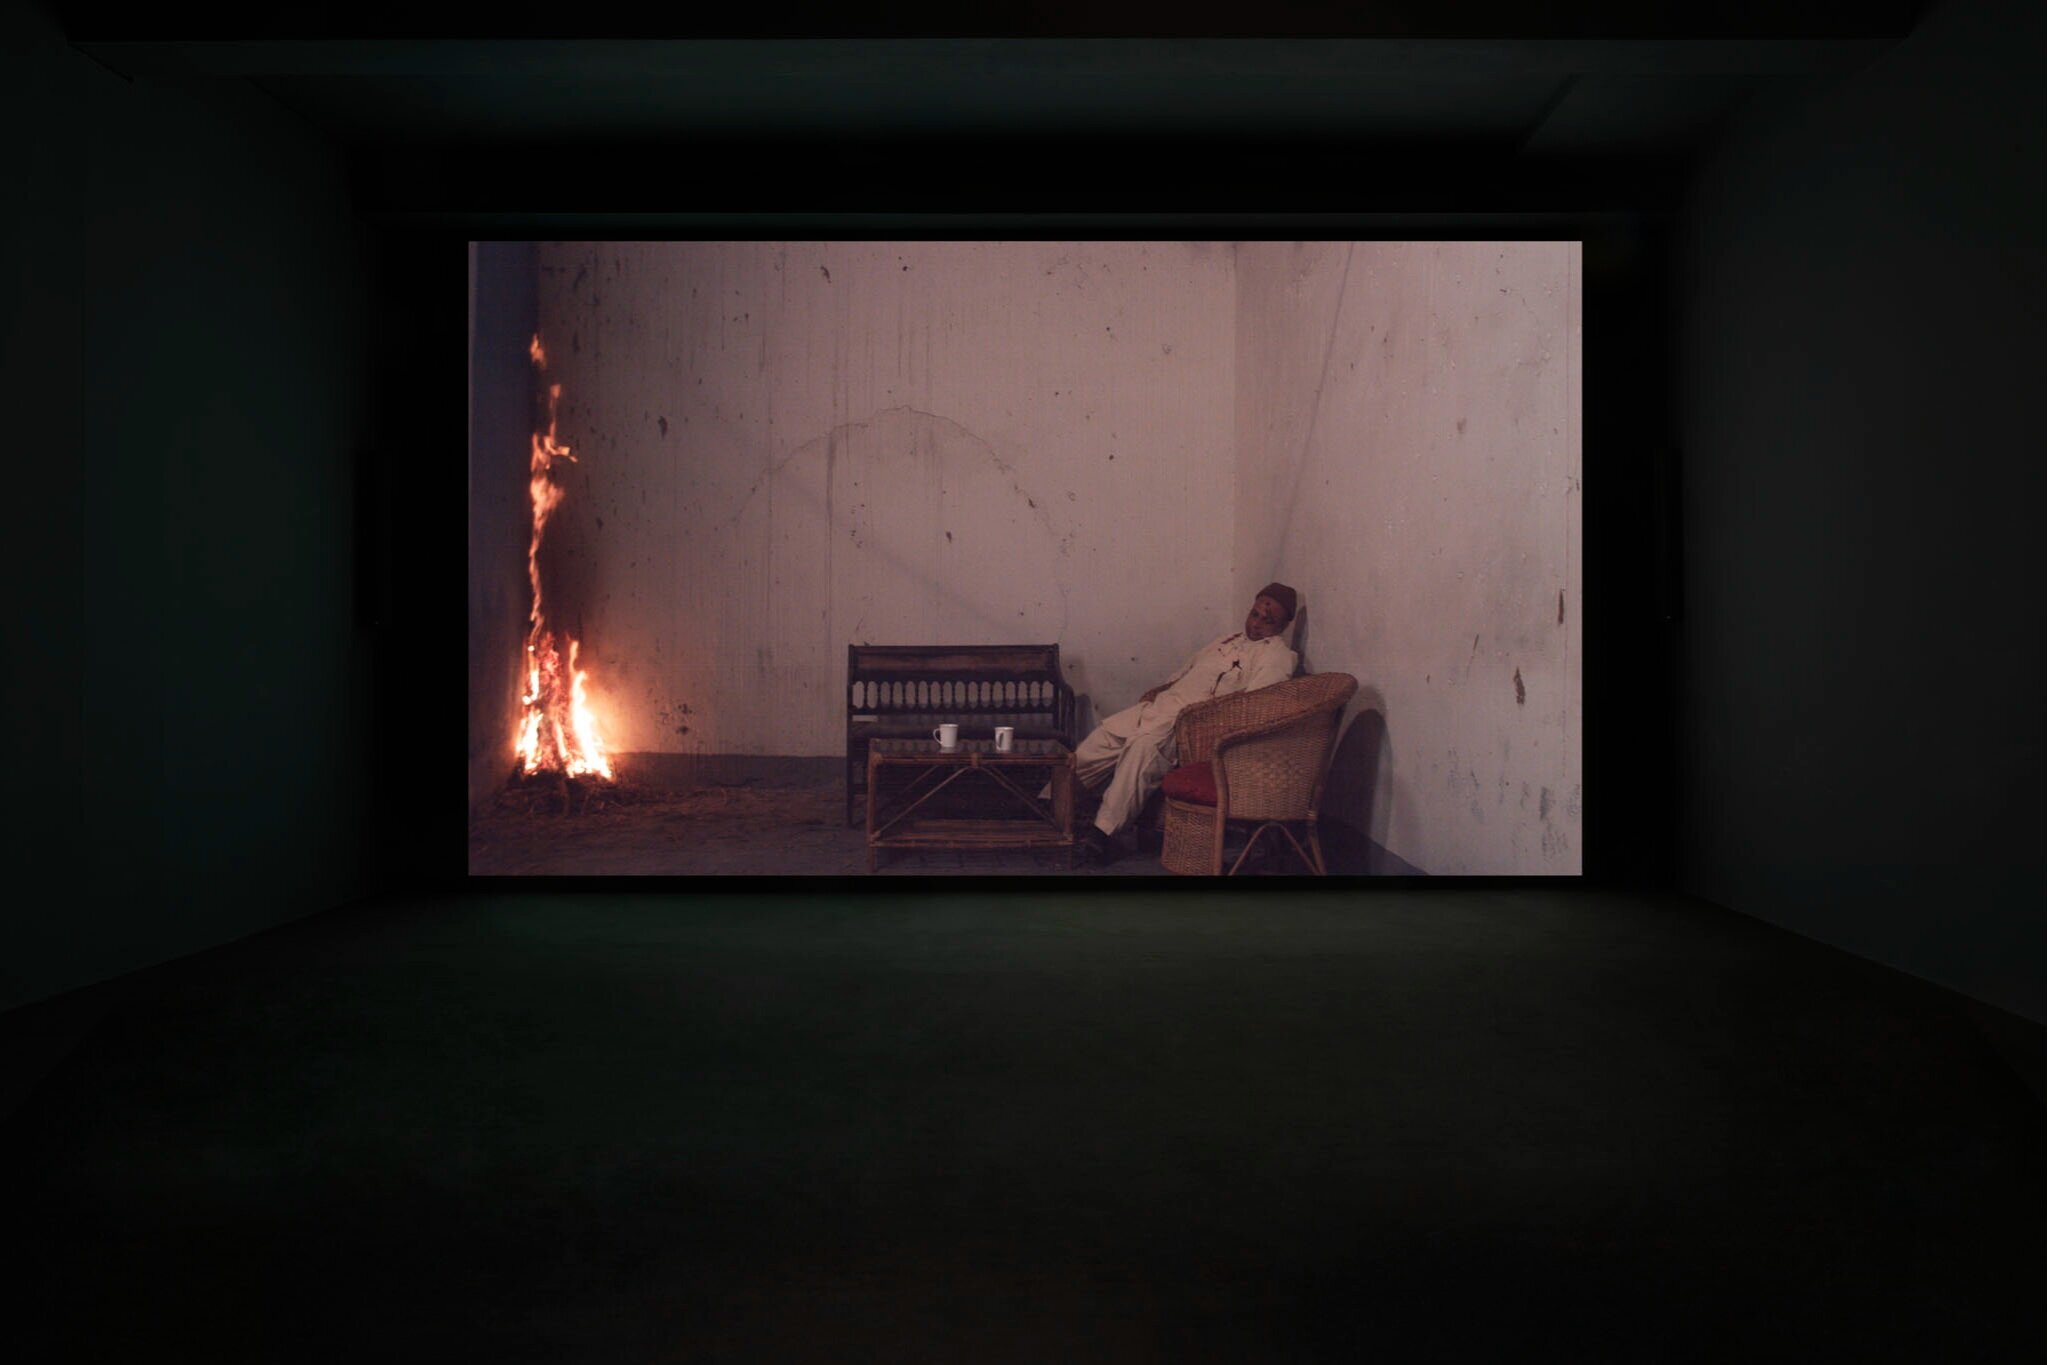   Basir Mahmood. Good ended happily , 2021, installation view, M1 VideoSpace, KINDL, photo: Jens Ziehe 